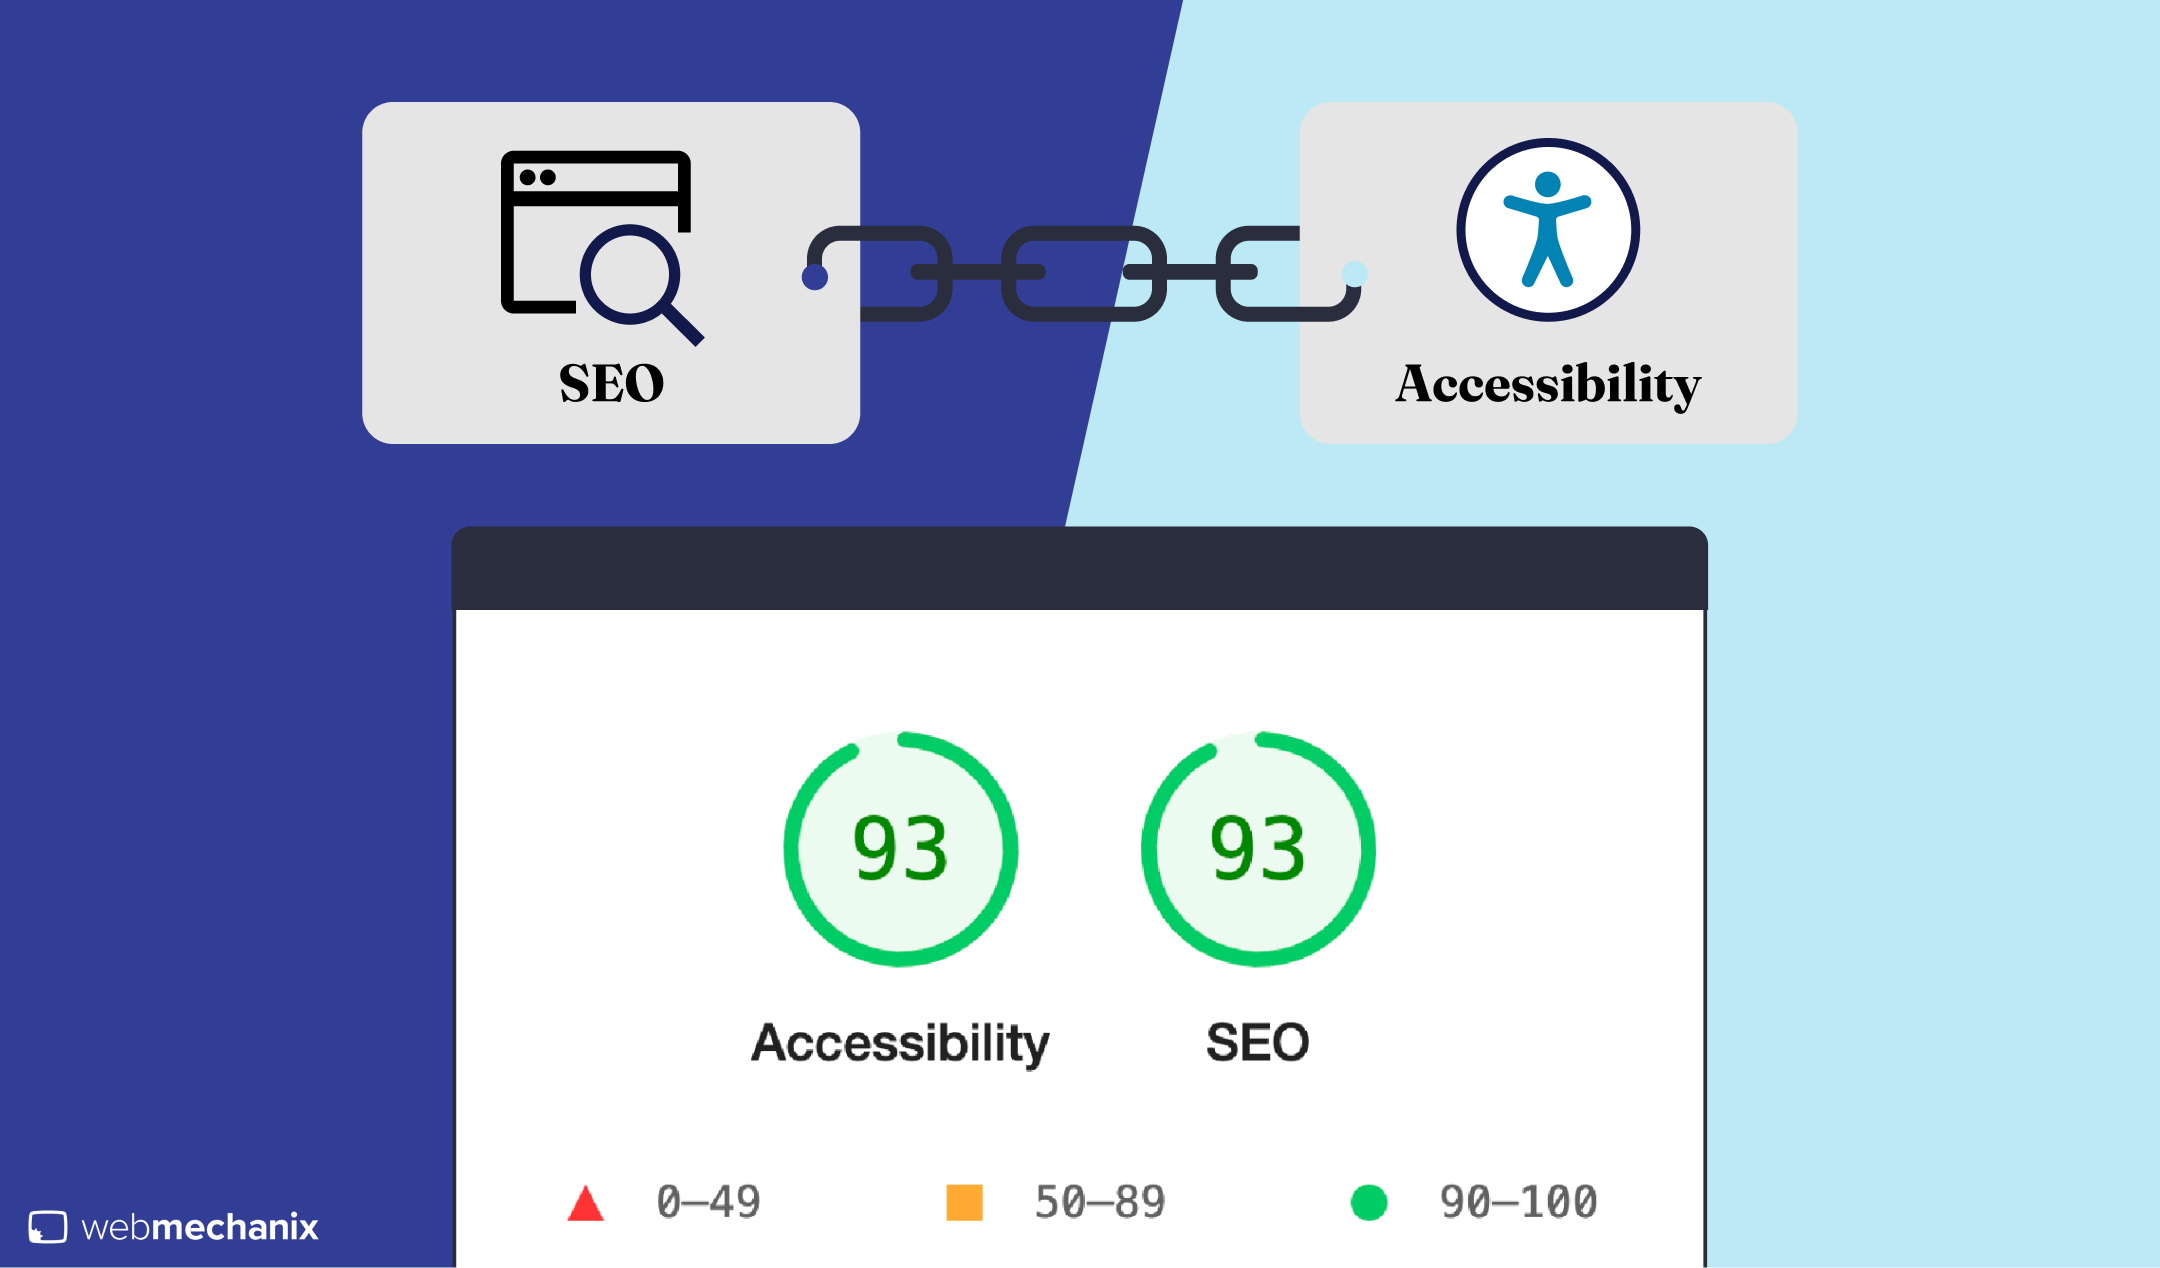 An illustration showing the link between SEO and Accessibility